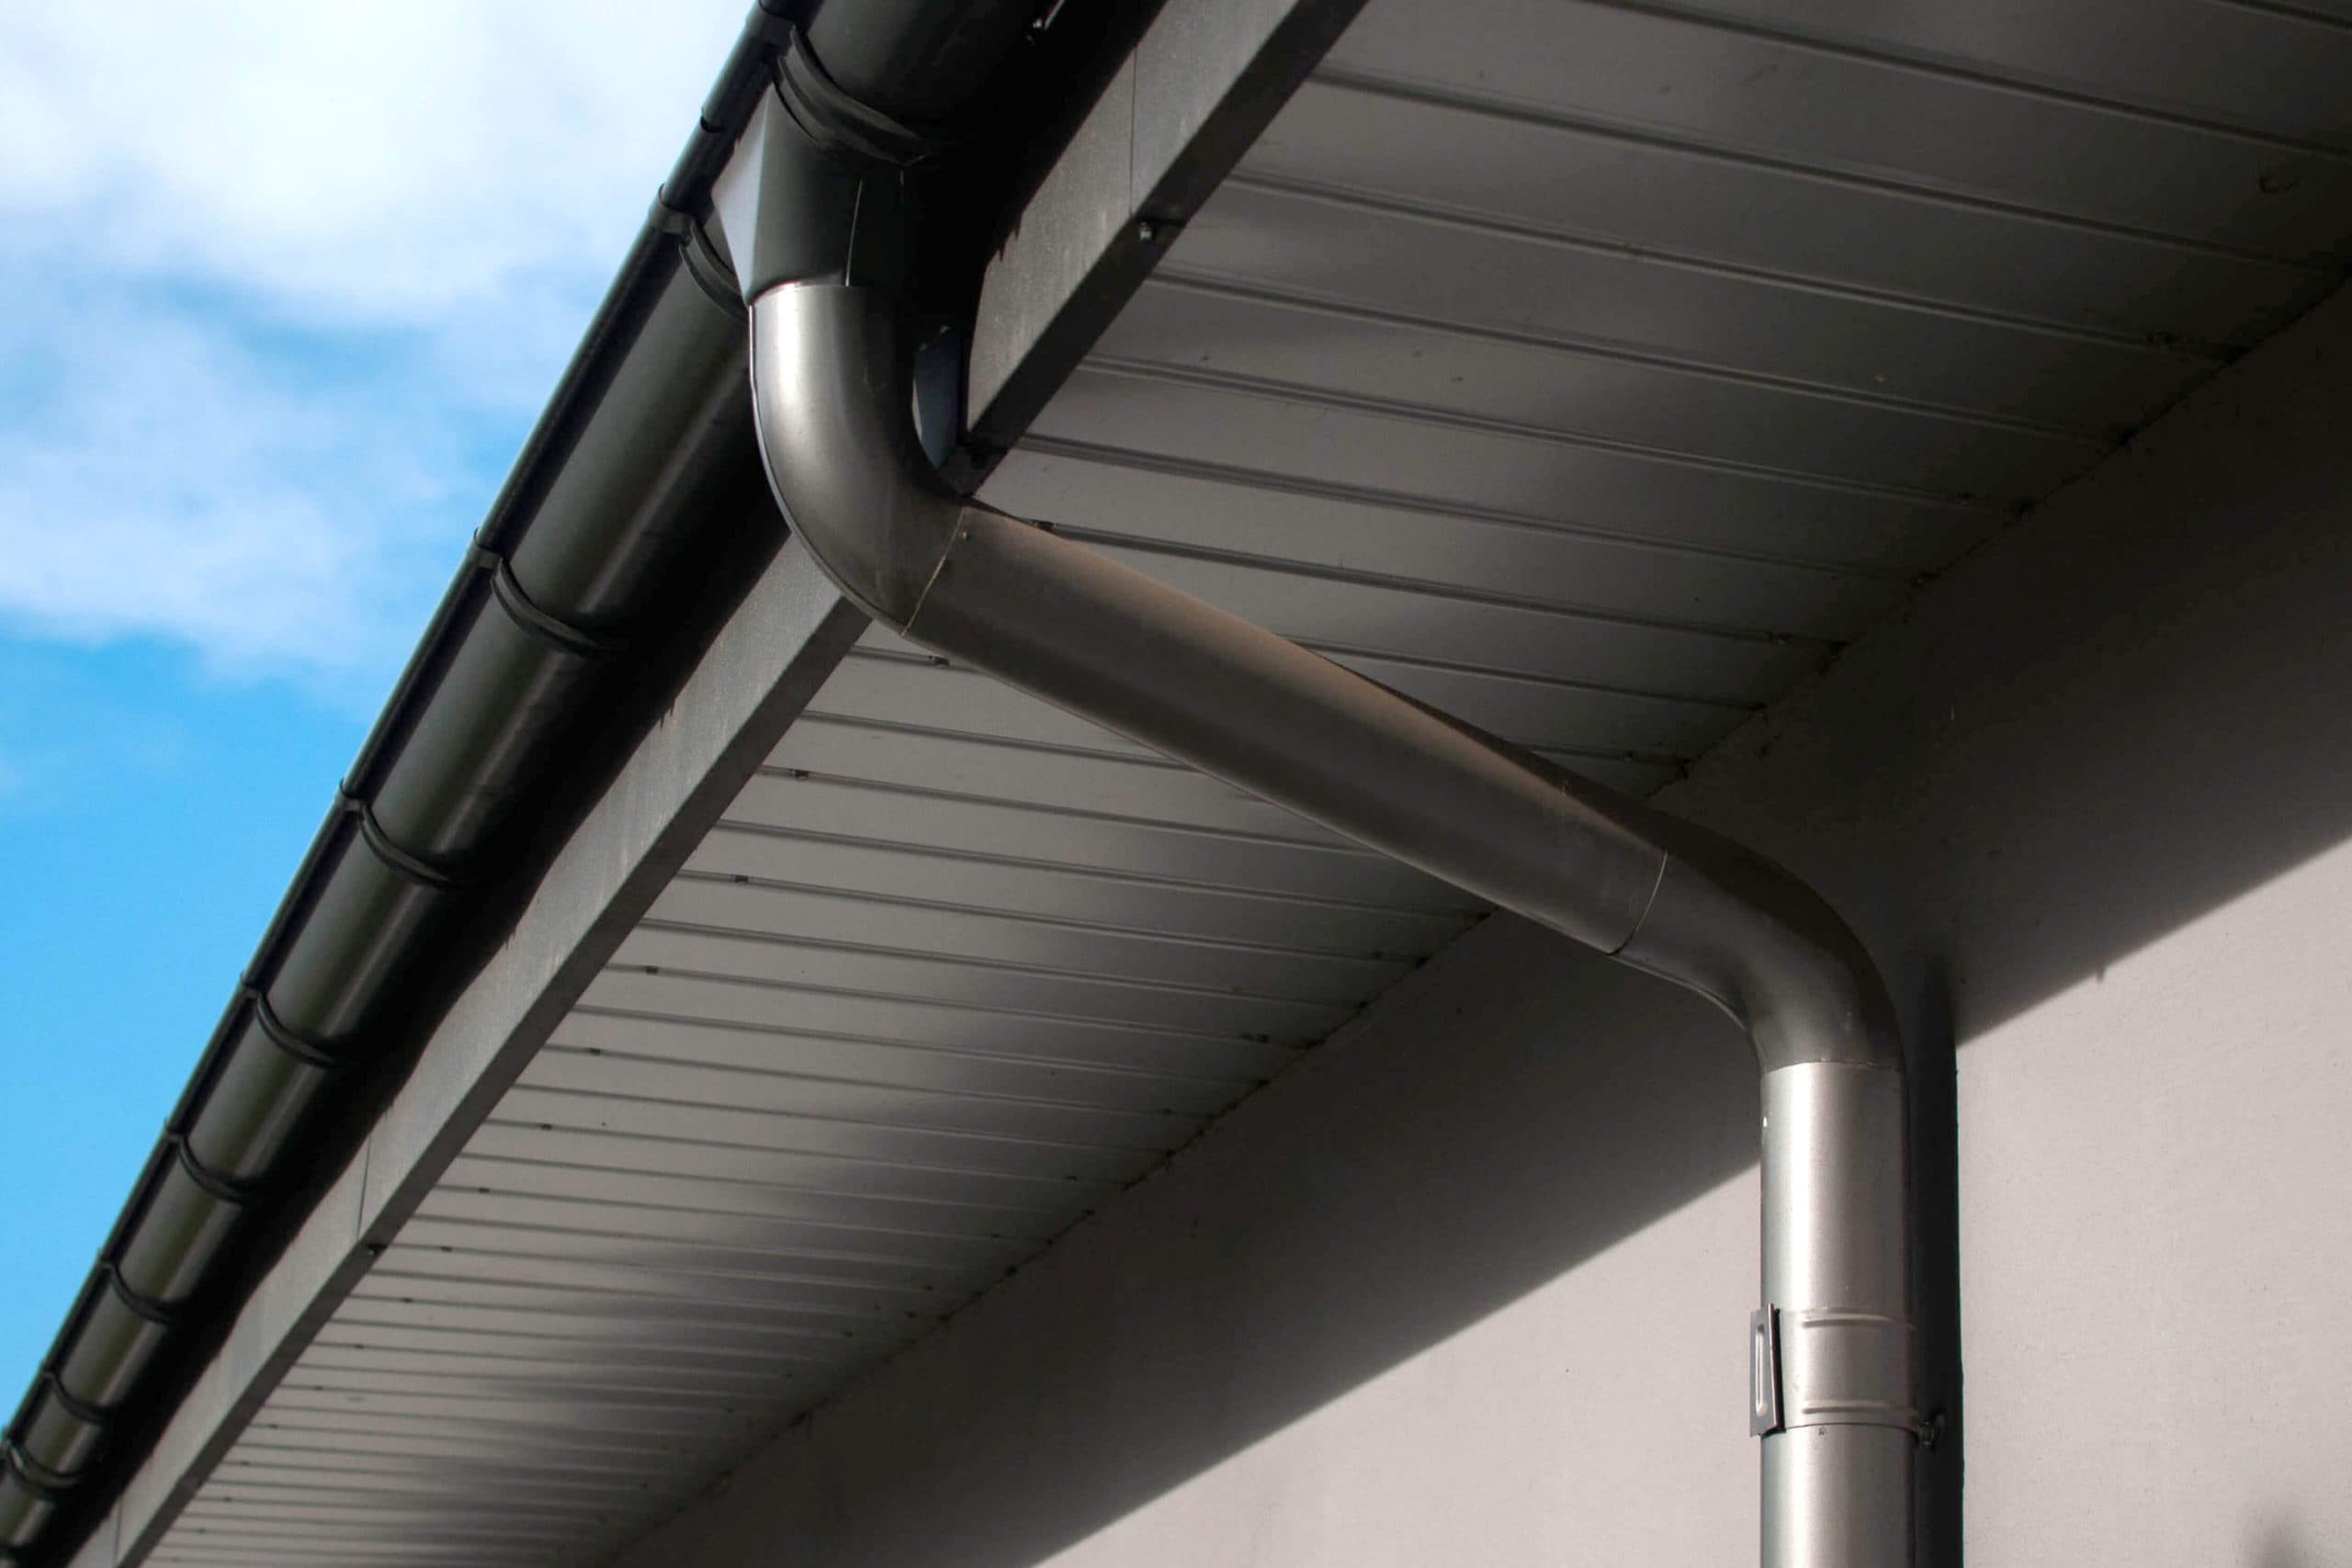 Corrosion-resistant galvanized gutters installed on a commercial building in Summerville